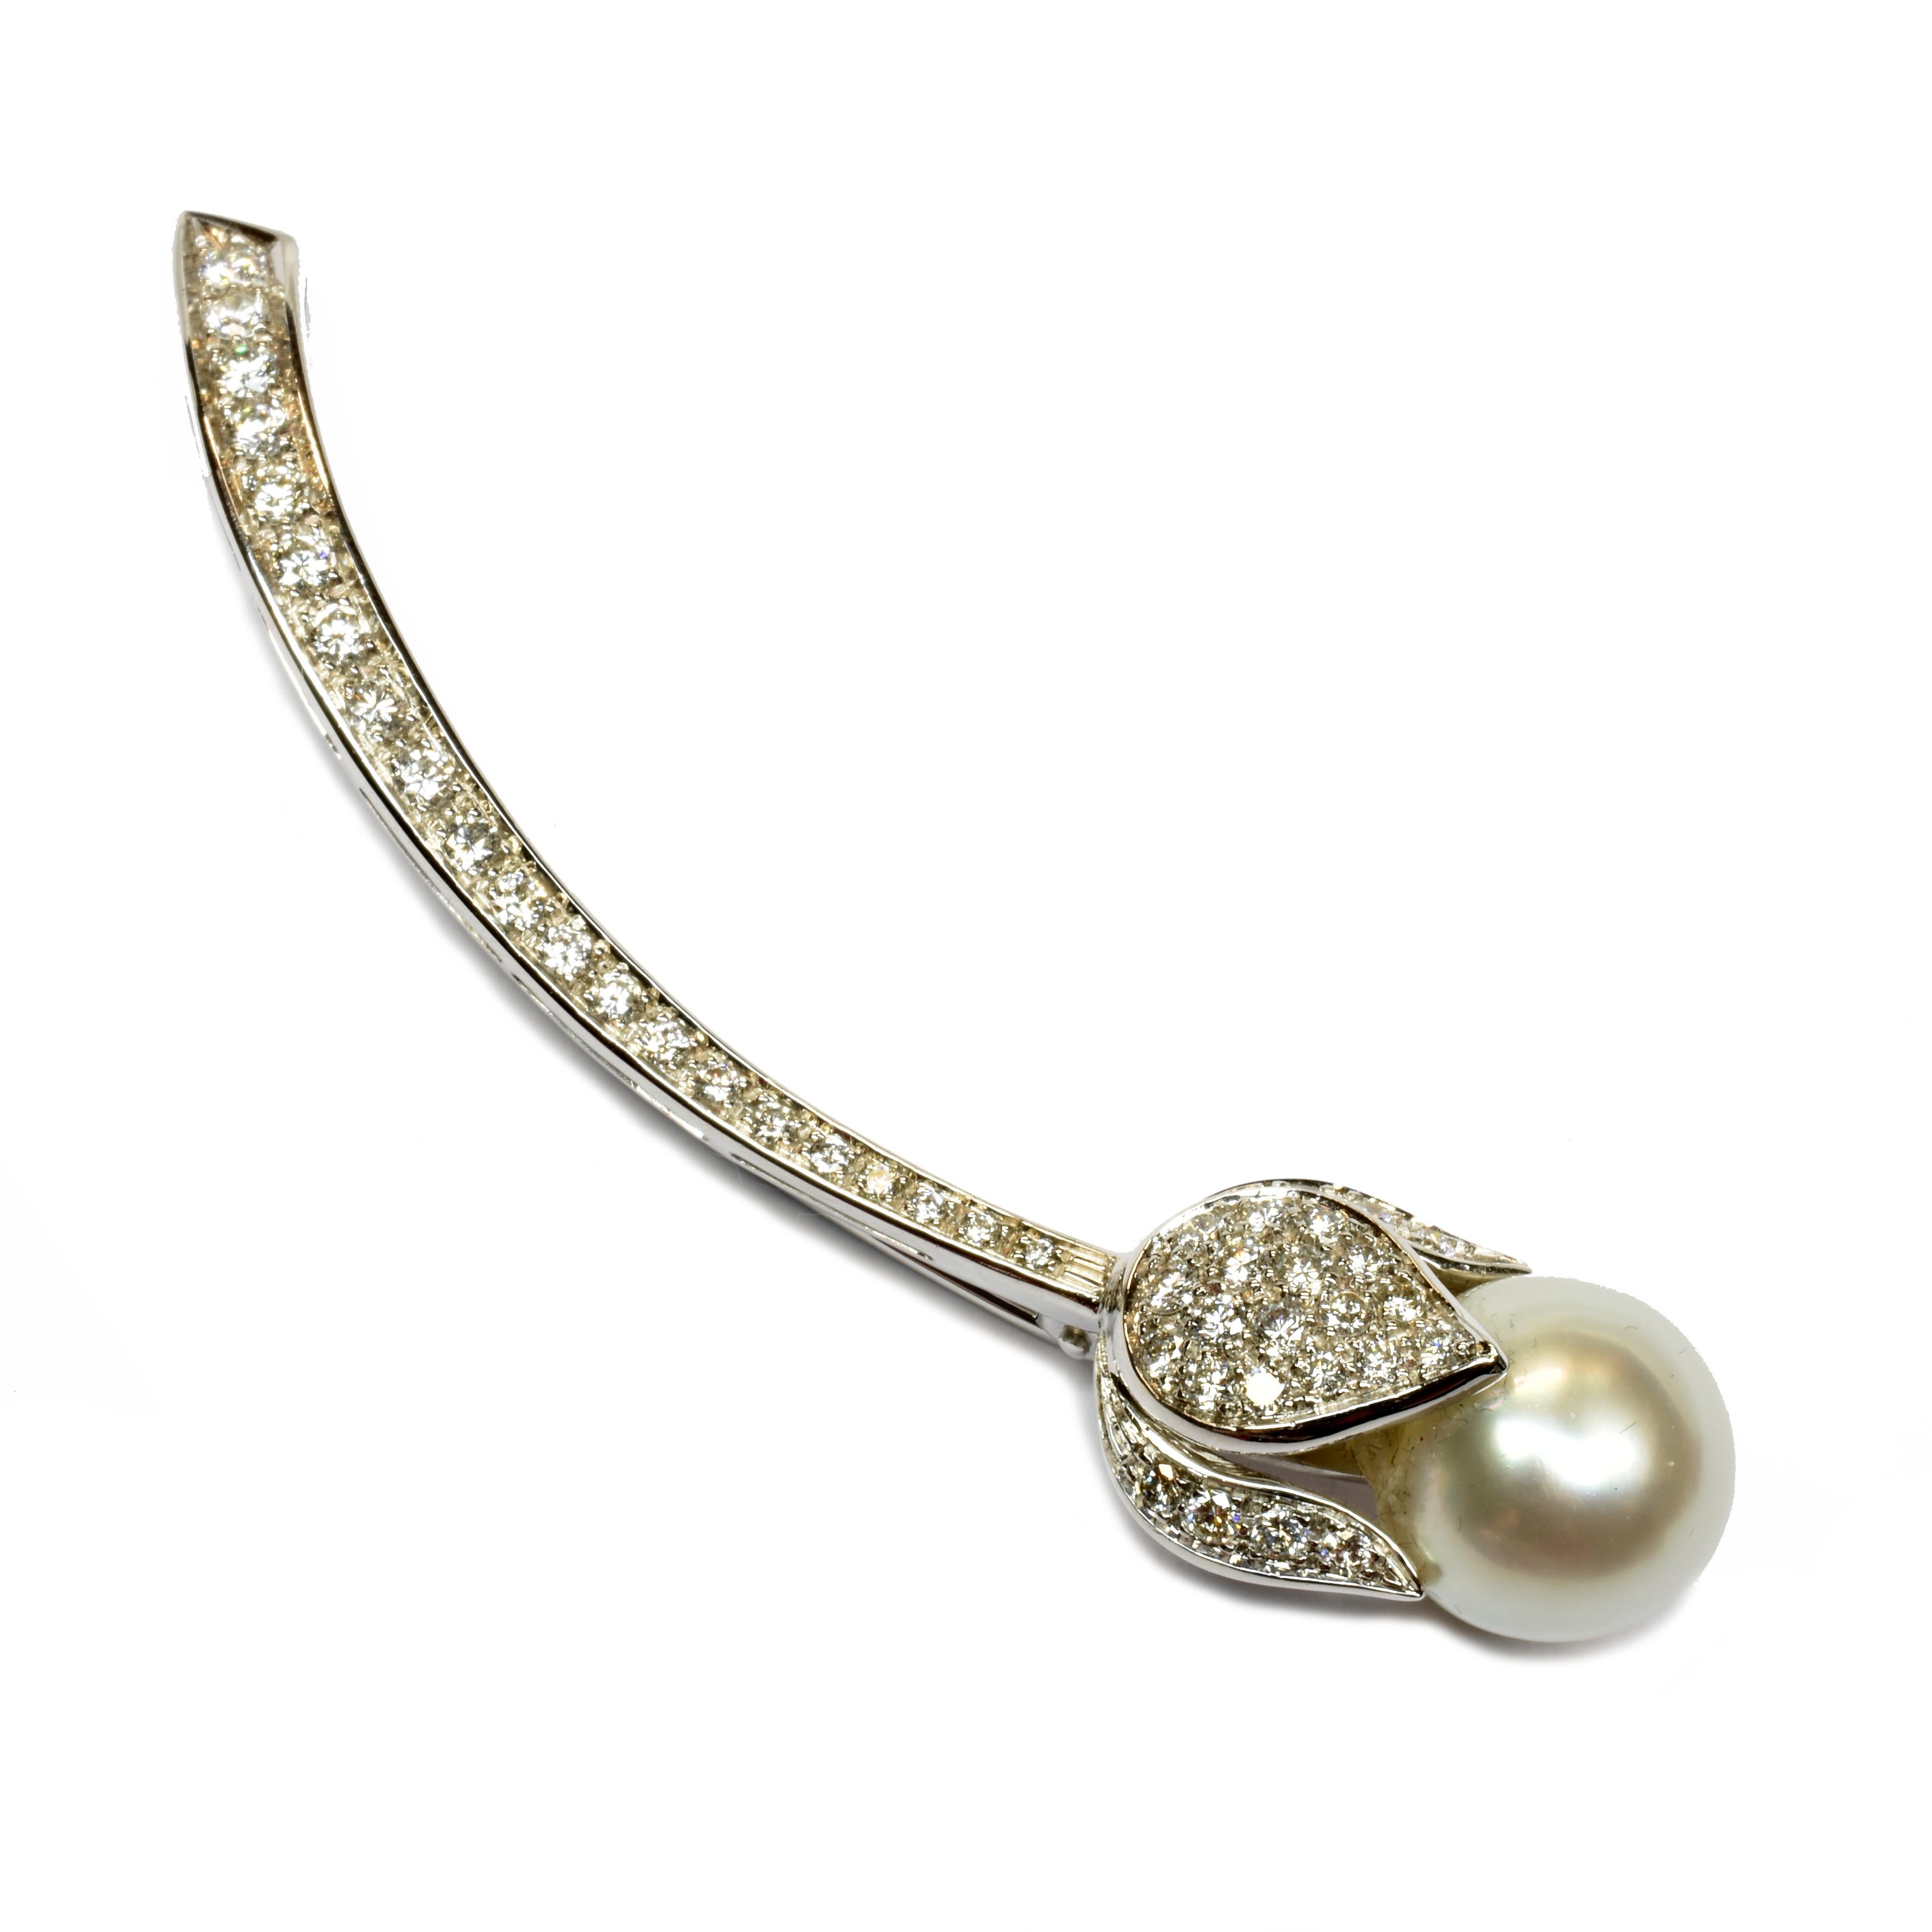 Gilberto Cassola 18Kt Gold Floral Brooch with Diamonds and South Sea Pearl.
South Sea Pearl with a Diameter of 12 mm and a nice White/White-Silver Color.
Unique Piece Handmade in our Atelier in Valenza Italy.
Looks perfect on a Business Jacket or on